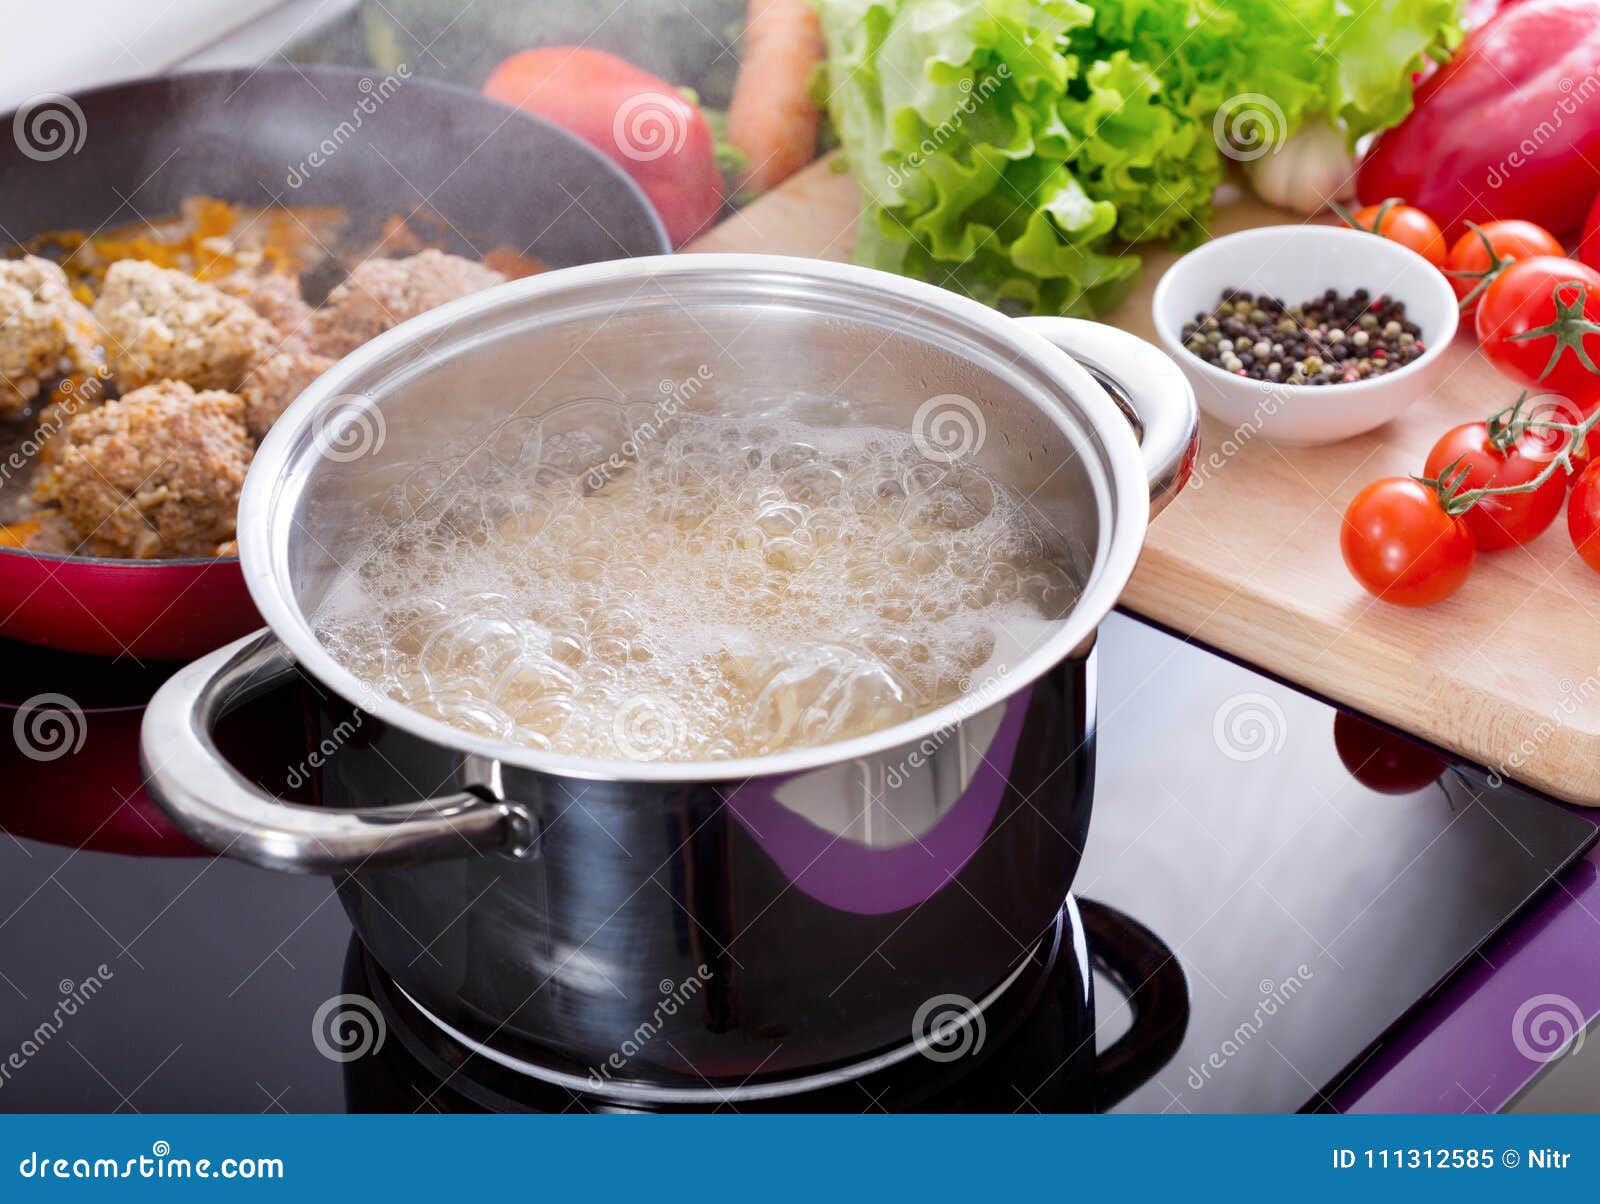 https://thumbs.dreamstime.com/z/cooking-spaghetti-pot-boiling-water-cooker-kitchen-cooking-spaghetti-pot-boiling-water-111312585.jpg